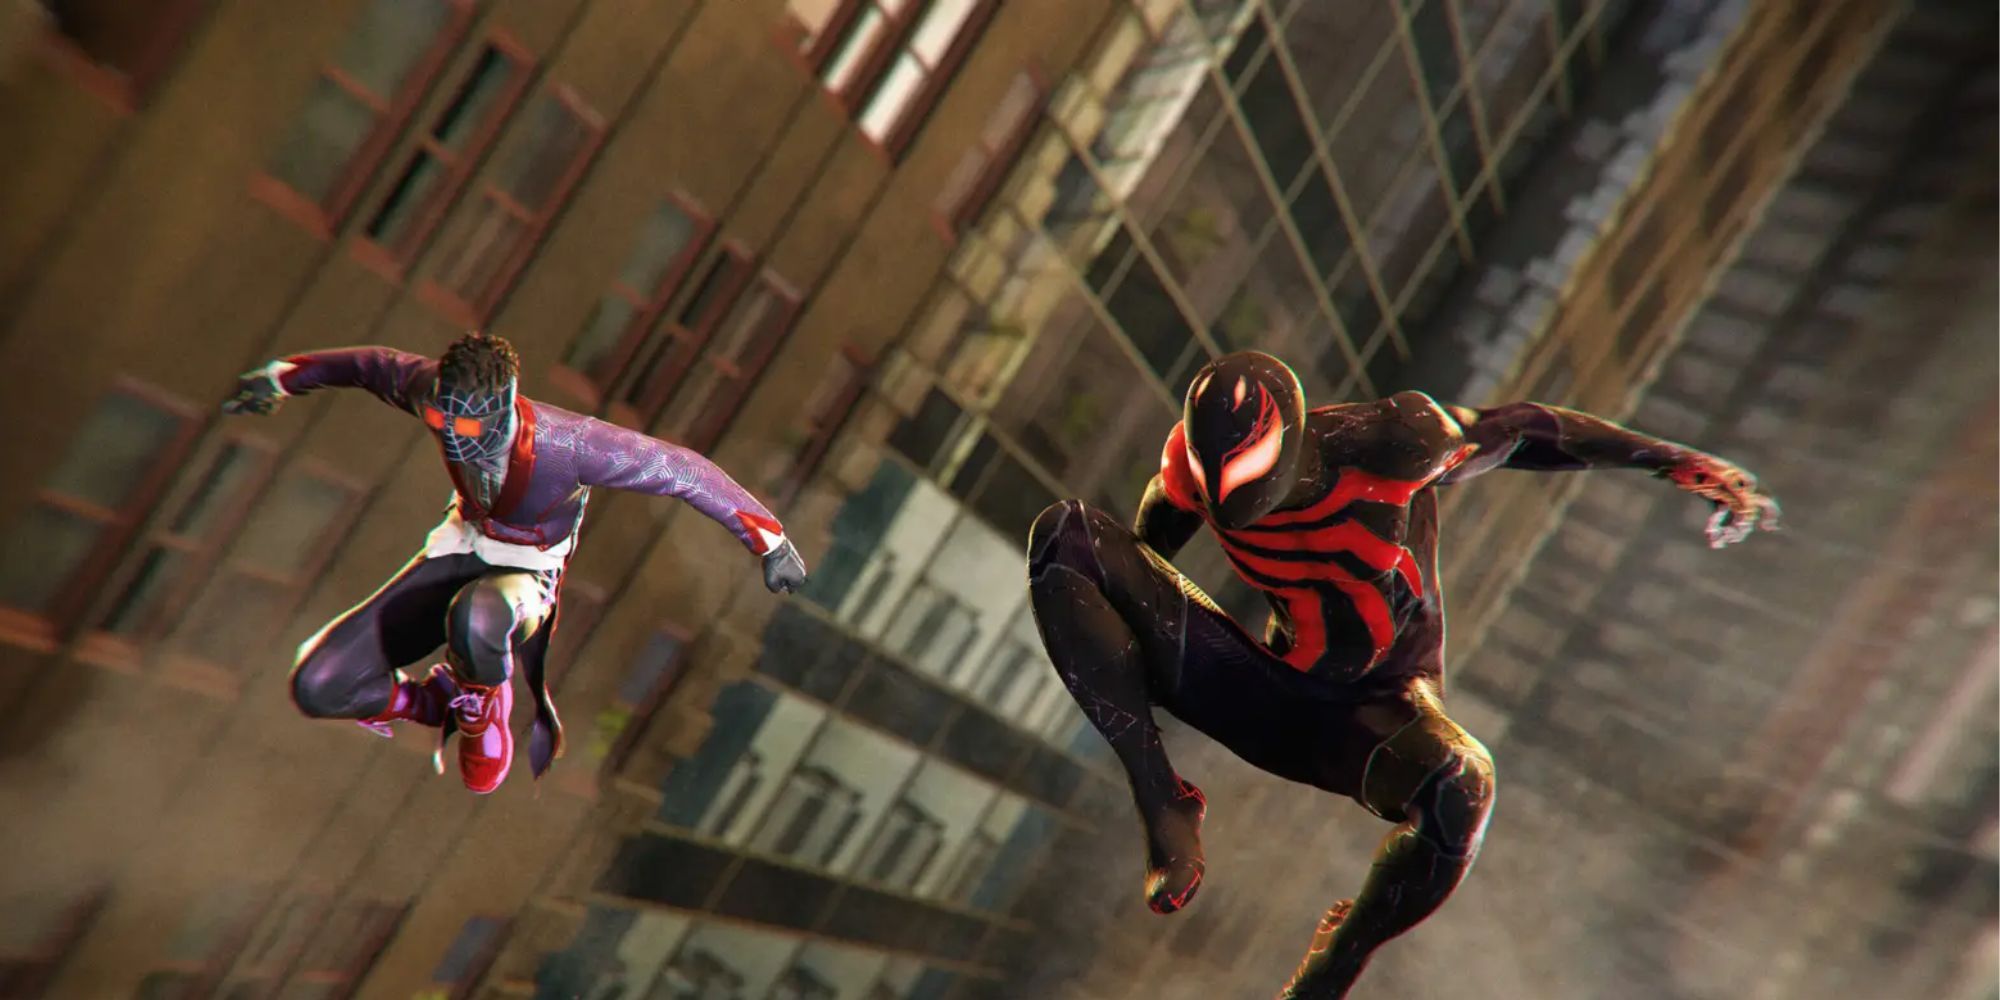 Spider-Man 2's New Game Plus outfits.